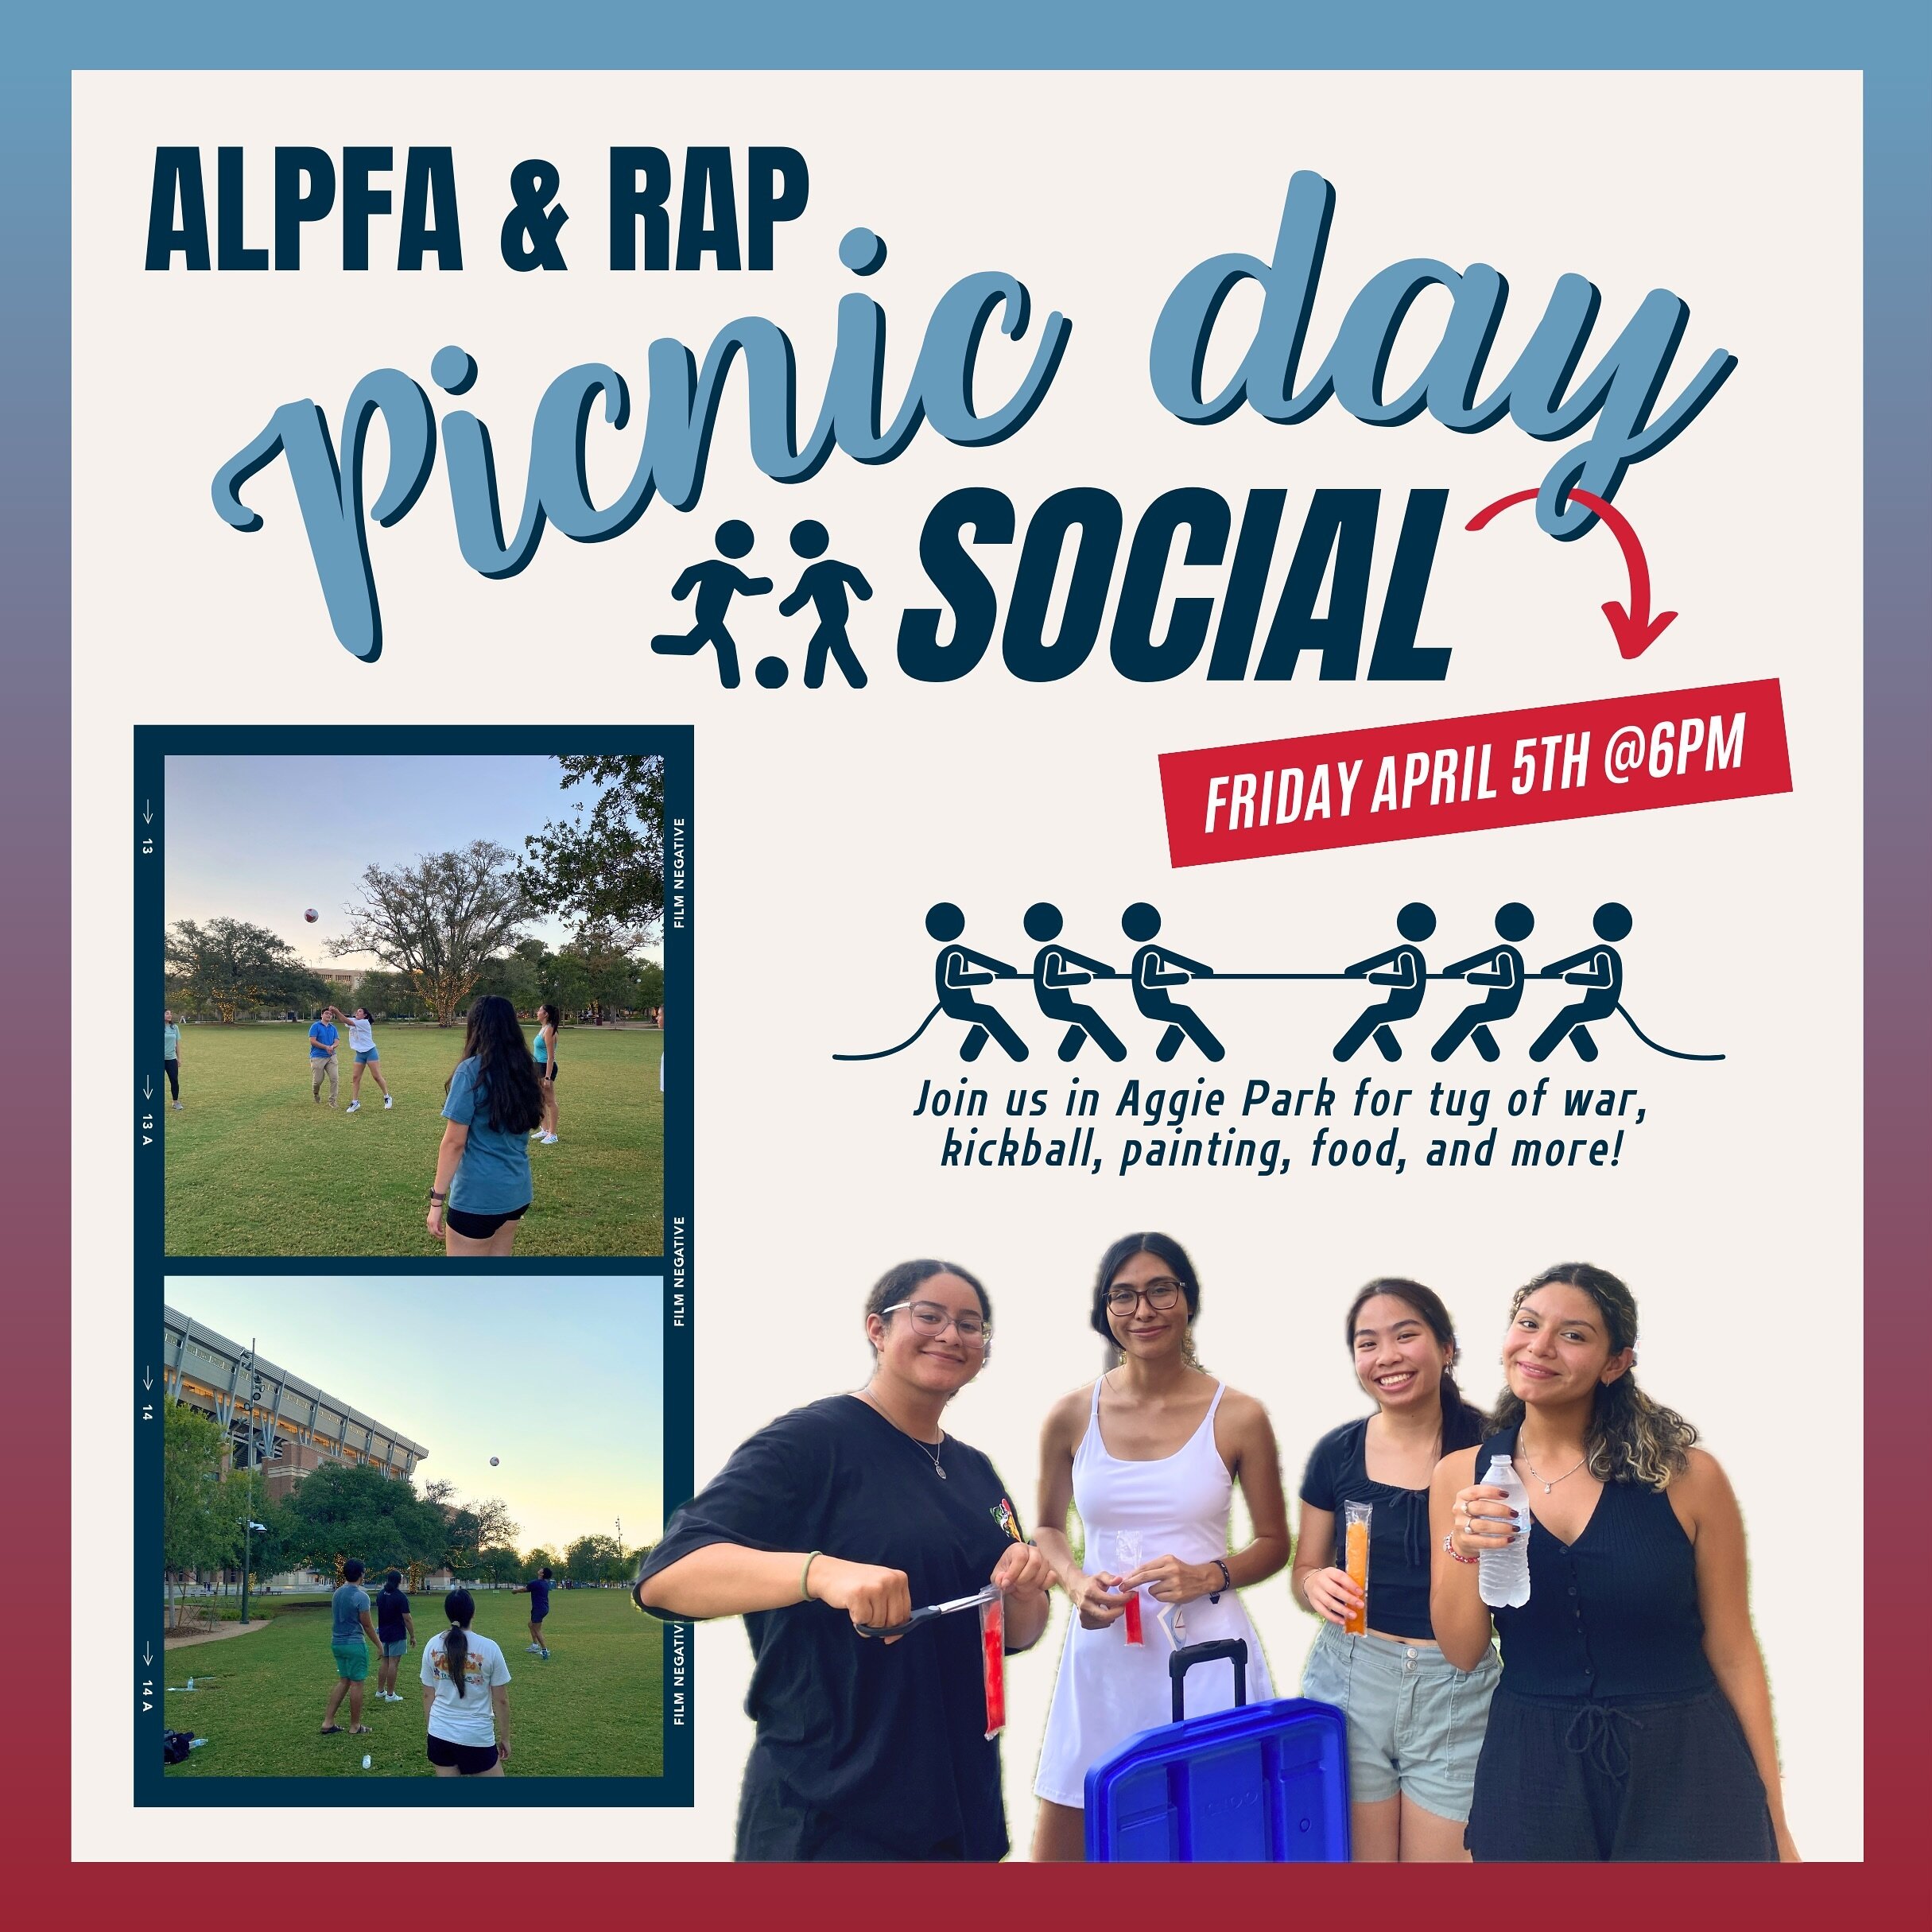 Don&rsquo;t miss our picnic day at Aggie Park tomorrow with @rap_tamu 🤸&zwj;♀️🏃&zwj;♂️🤾 

We will have kickball, tug of war, painting, food, and so much more! ⚽️🌤️😎 See you there!